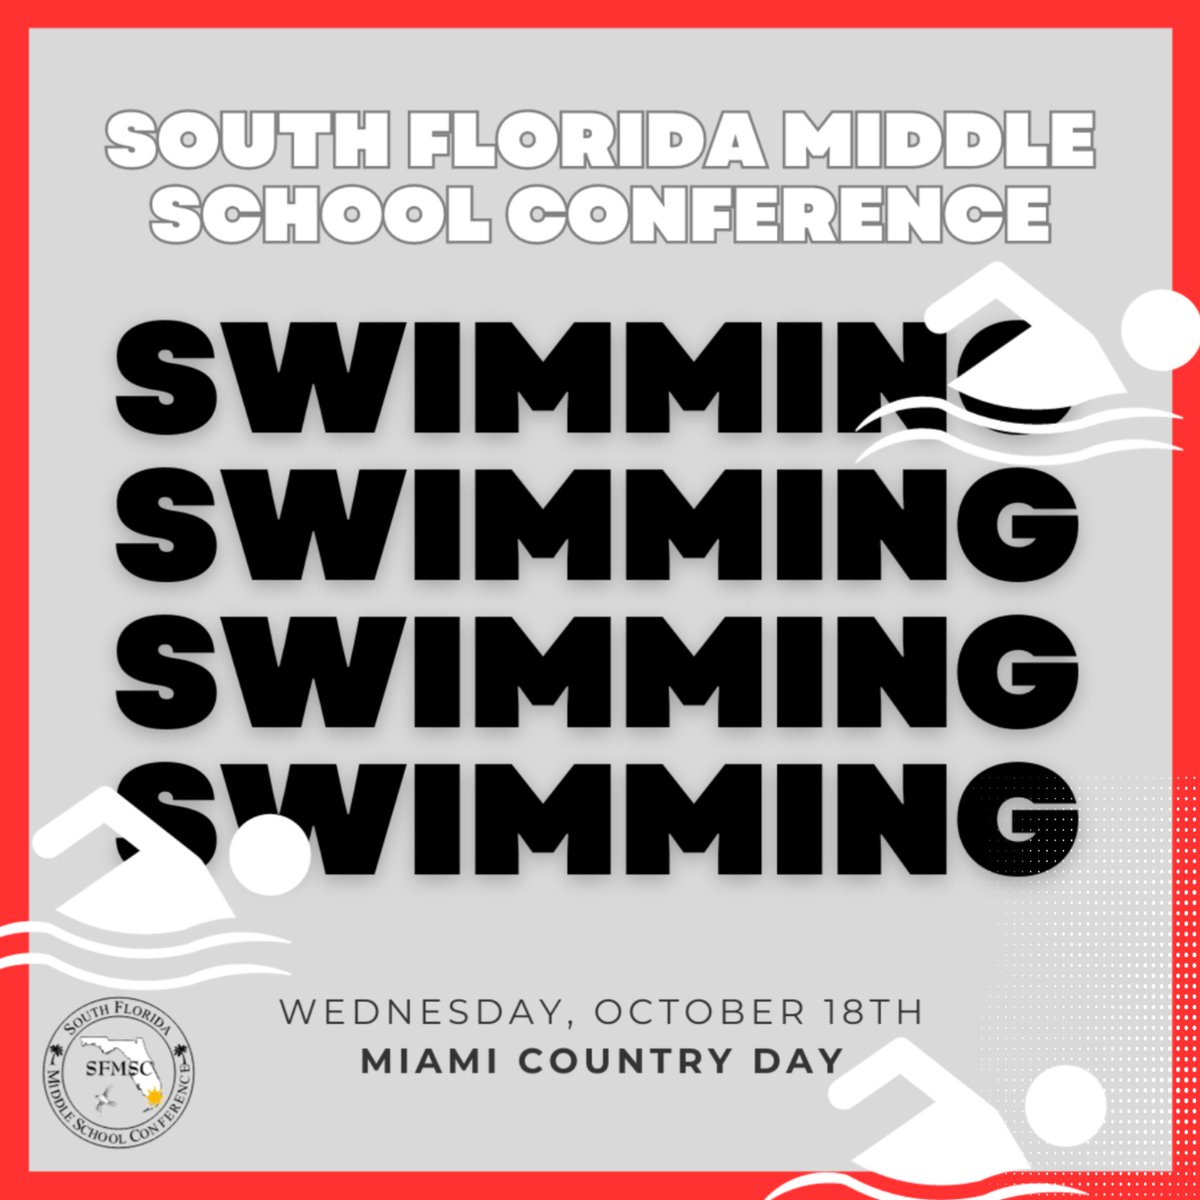 Support the Cyclones as they compete in the SFMSC Championships! #gocyclones #swimming #cssh #carrollton #WeAreSacredHeart